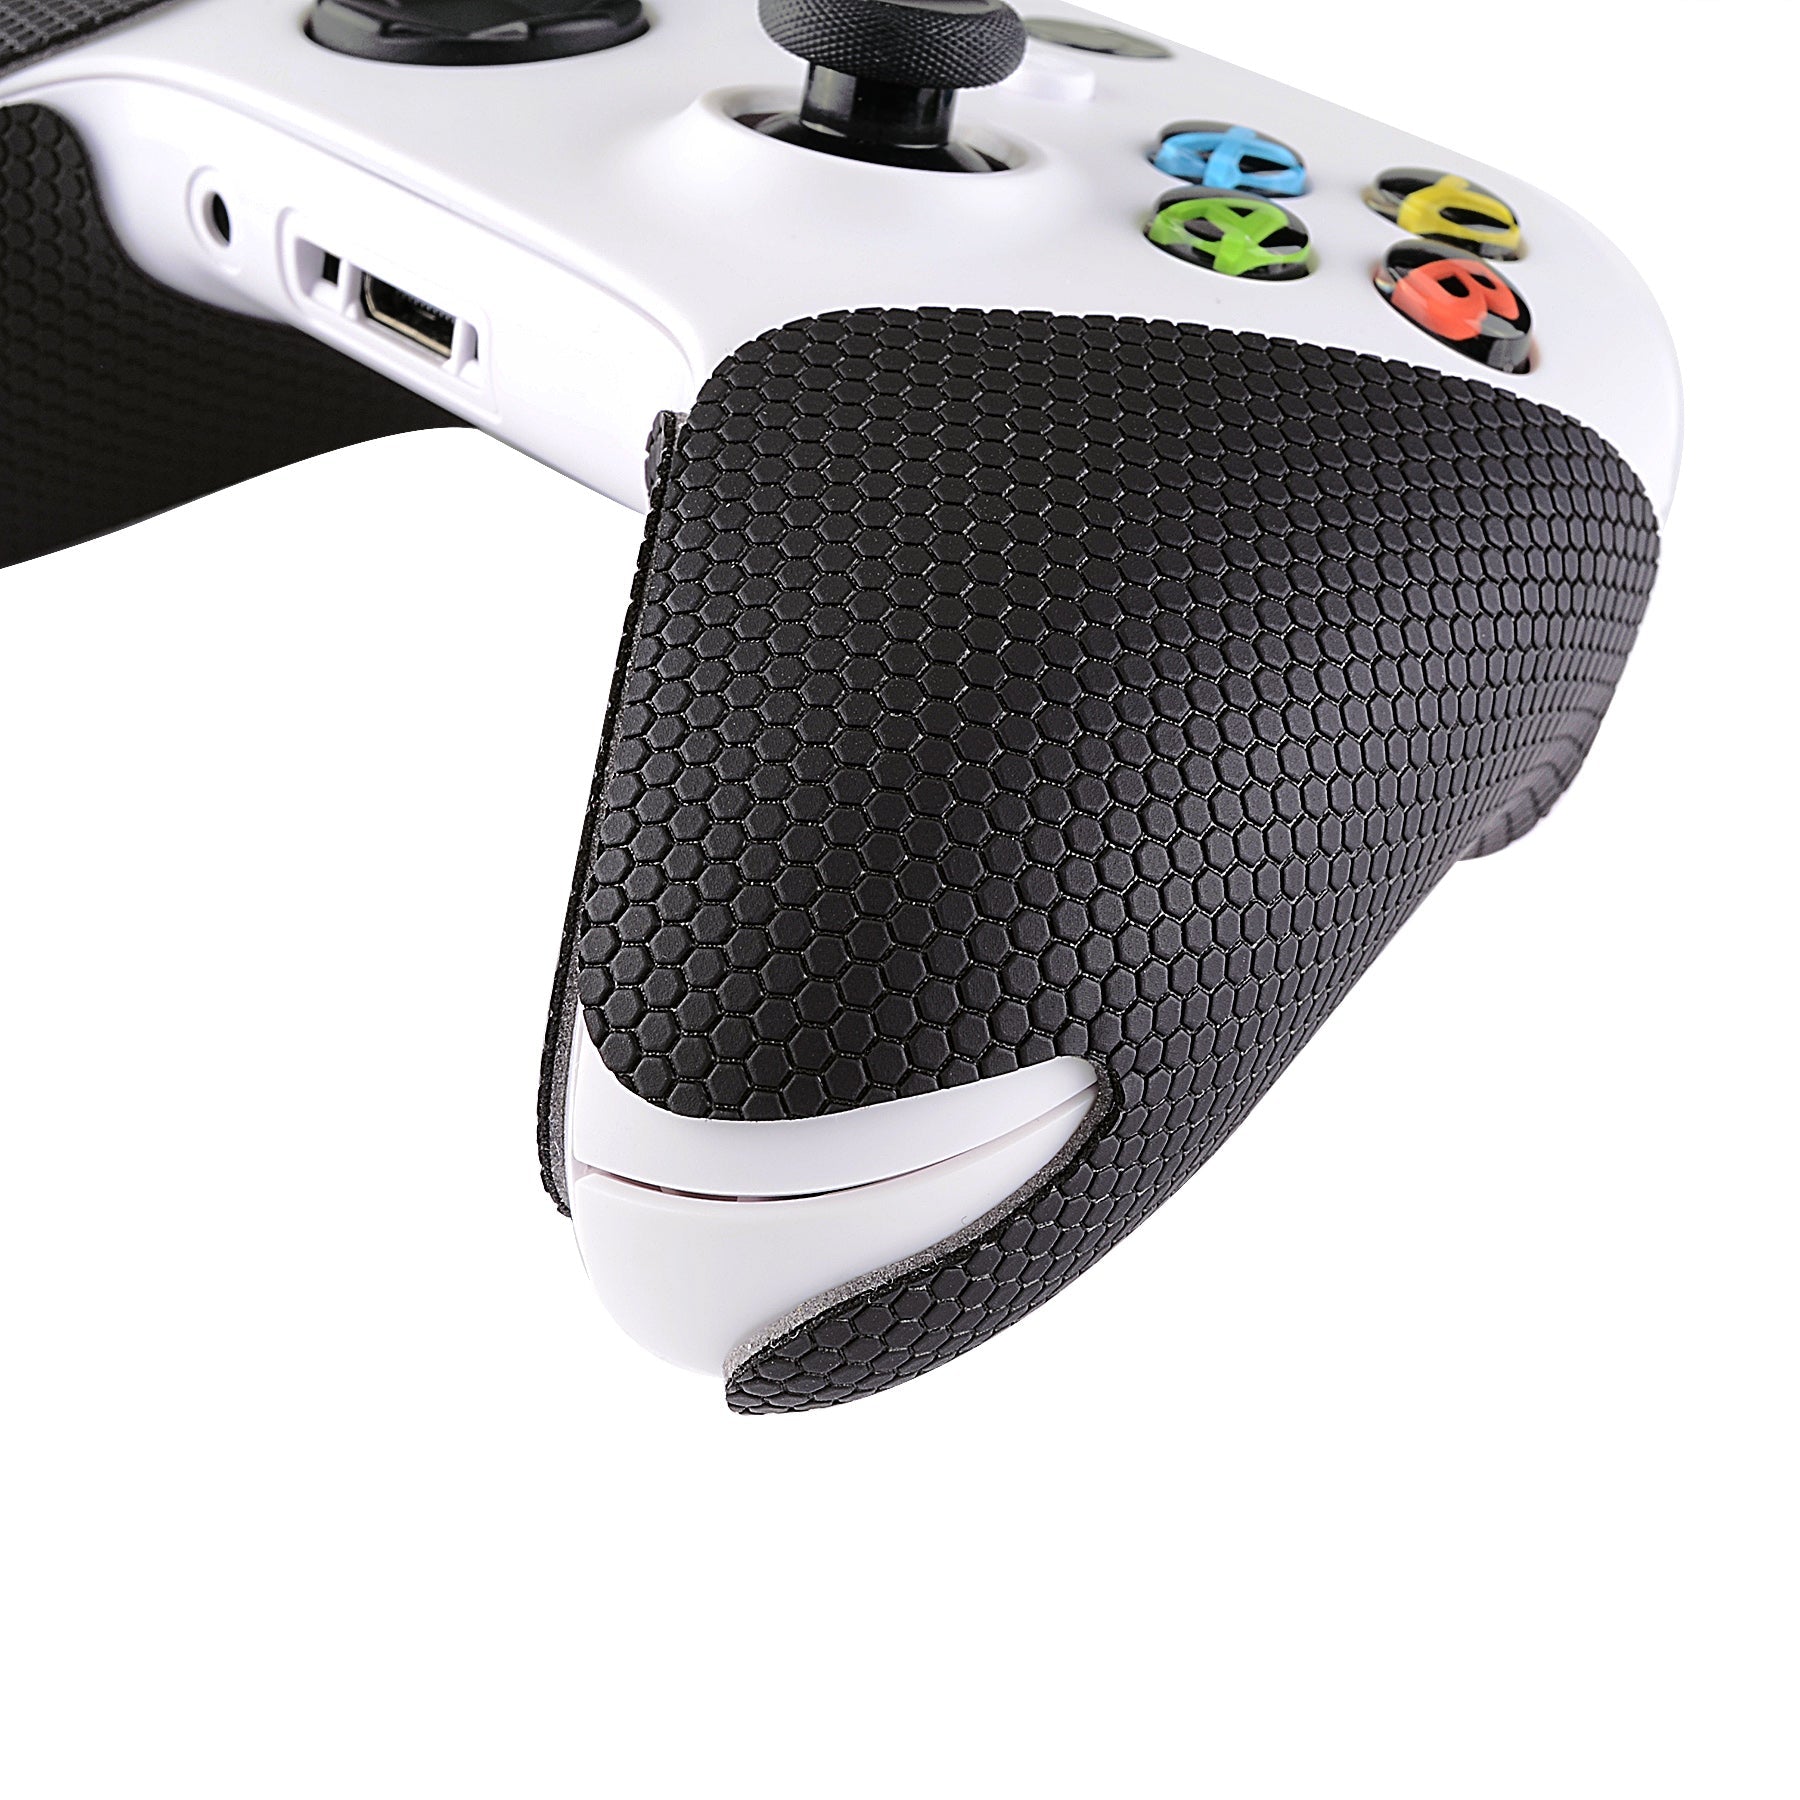 PlayVital Anti-Skid Sweat-Absorbent Controller Grip for Xbox Series X/S Controller, Professional Textured Soft Rubber Pads Handle Grips for Xbox Core Wireless Controller - X3PJ001 PlayVital